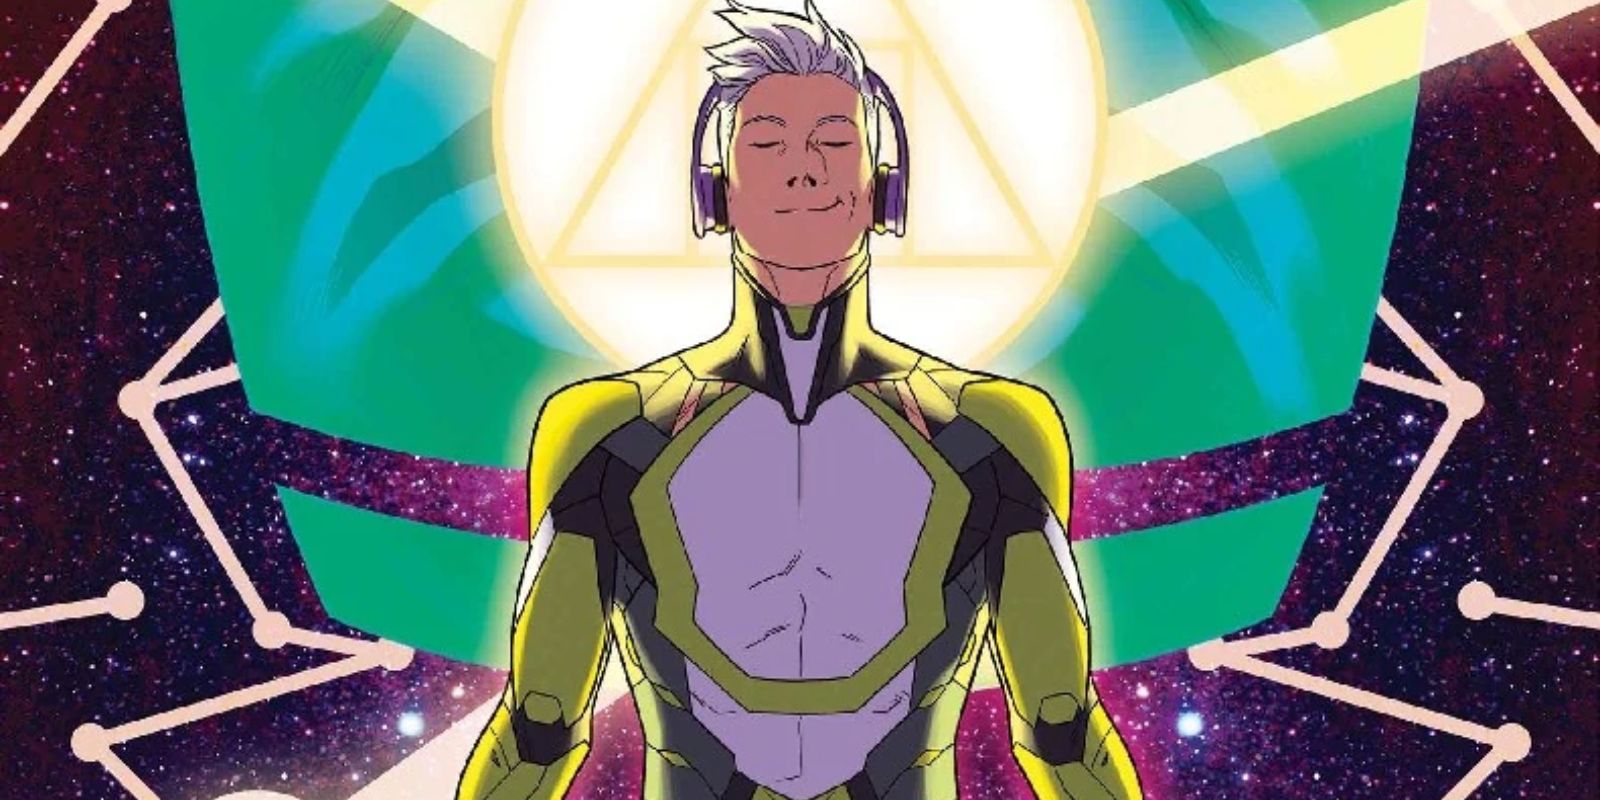 Noh-Varr Captain Marvel with headphones from Marvel Comics.